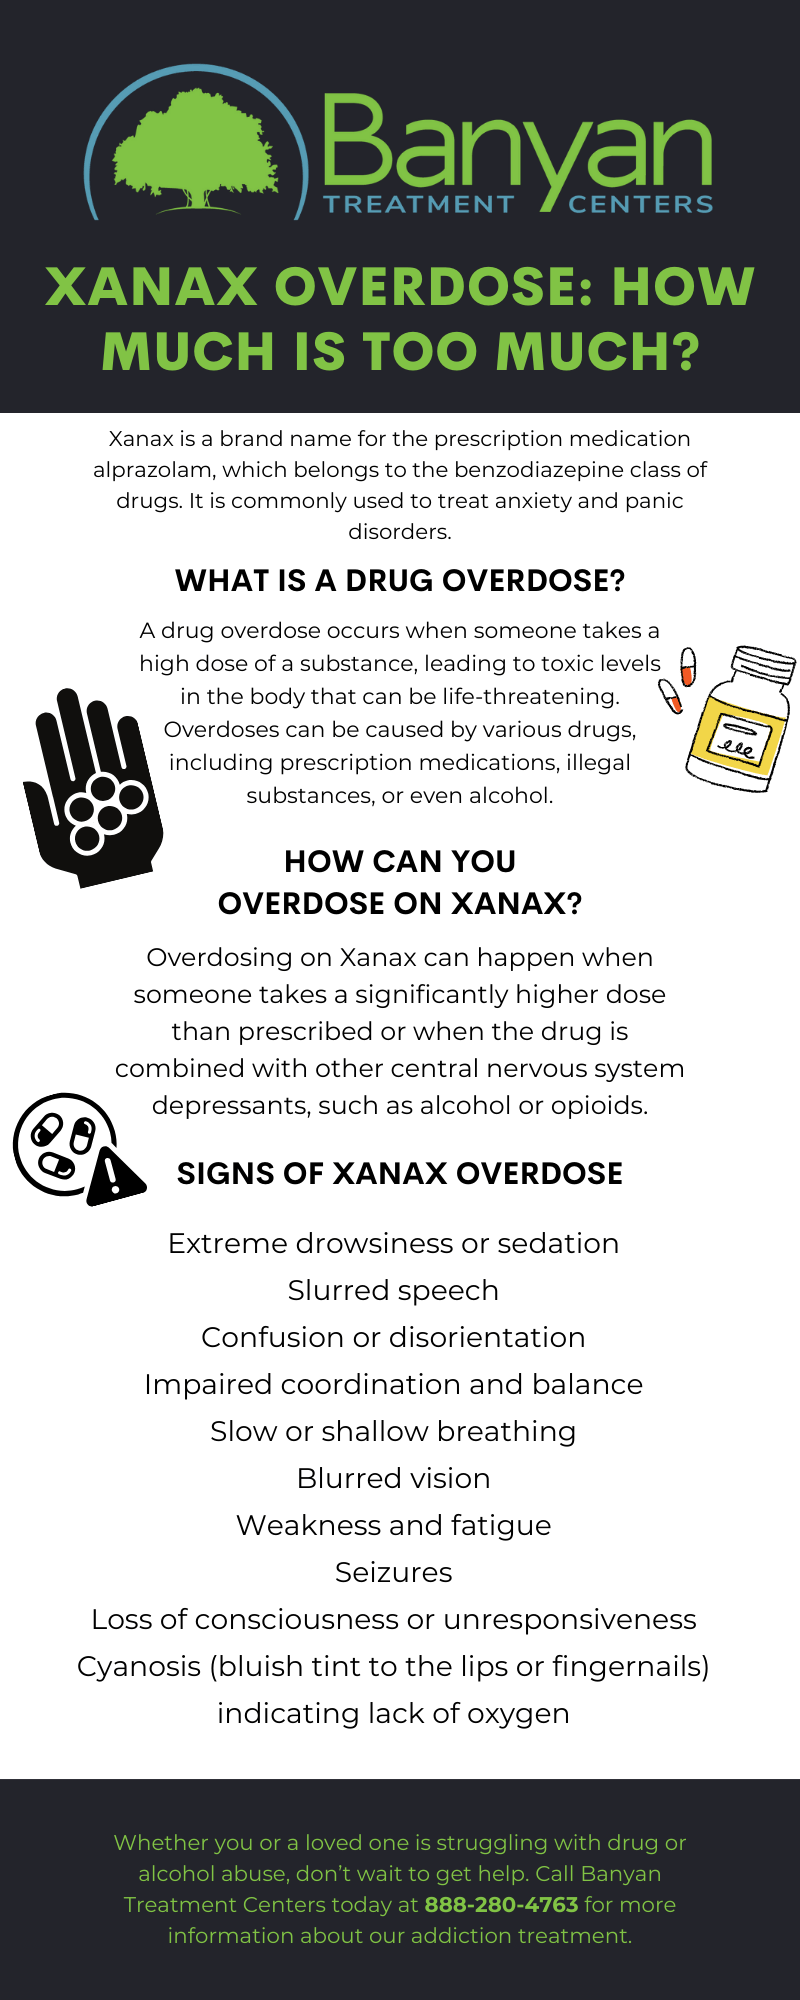 Infographic about Xanax overdose symptoms and signs